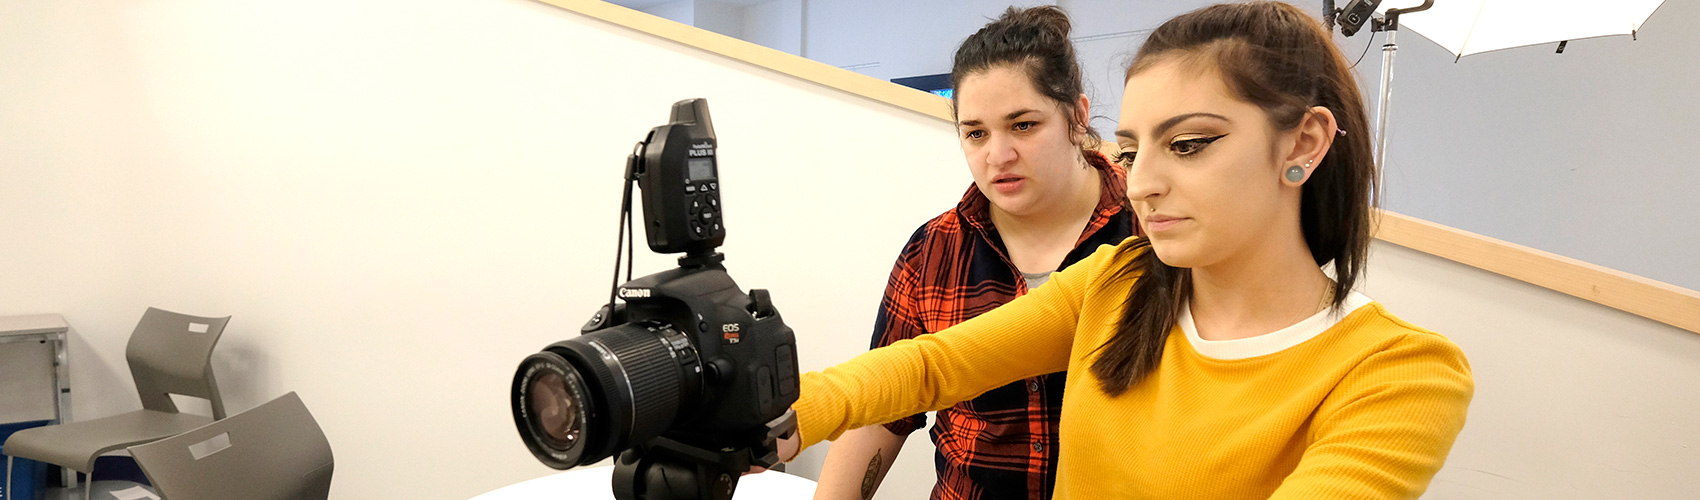 Two female photography students working with a professional camera preparing to capture a photograph